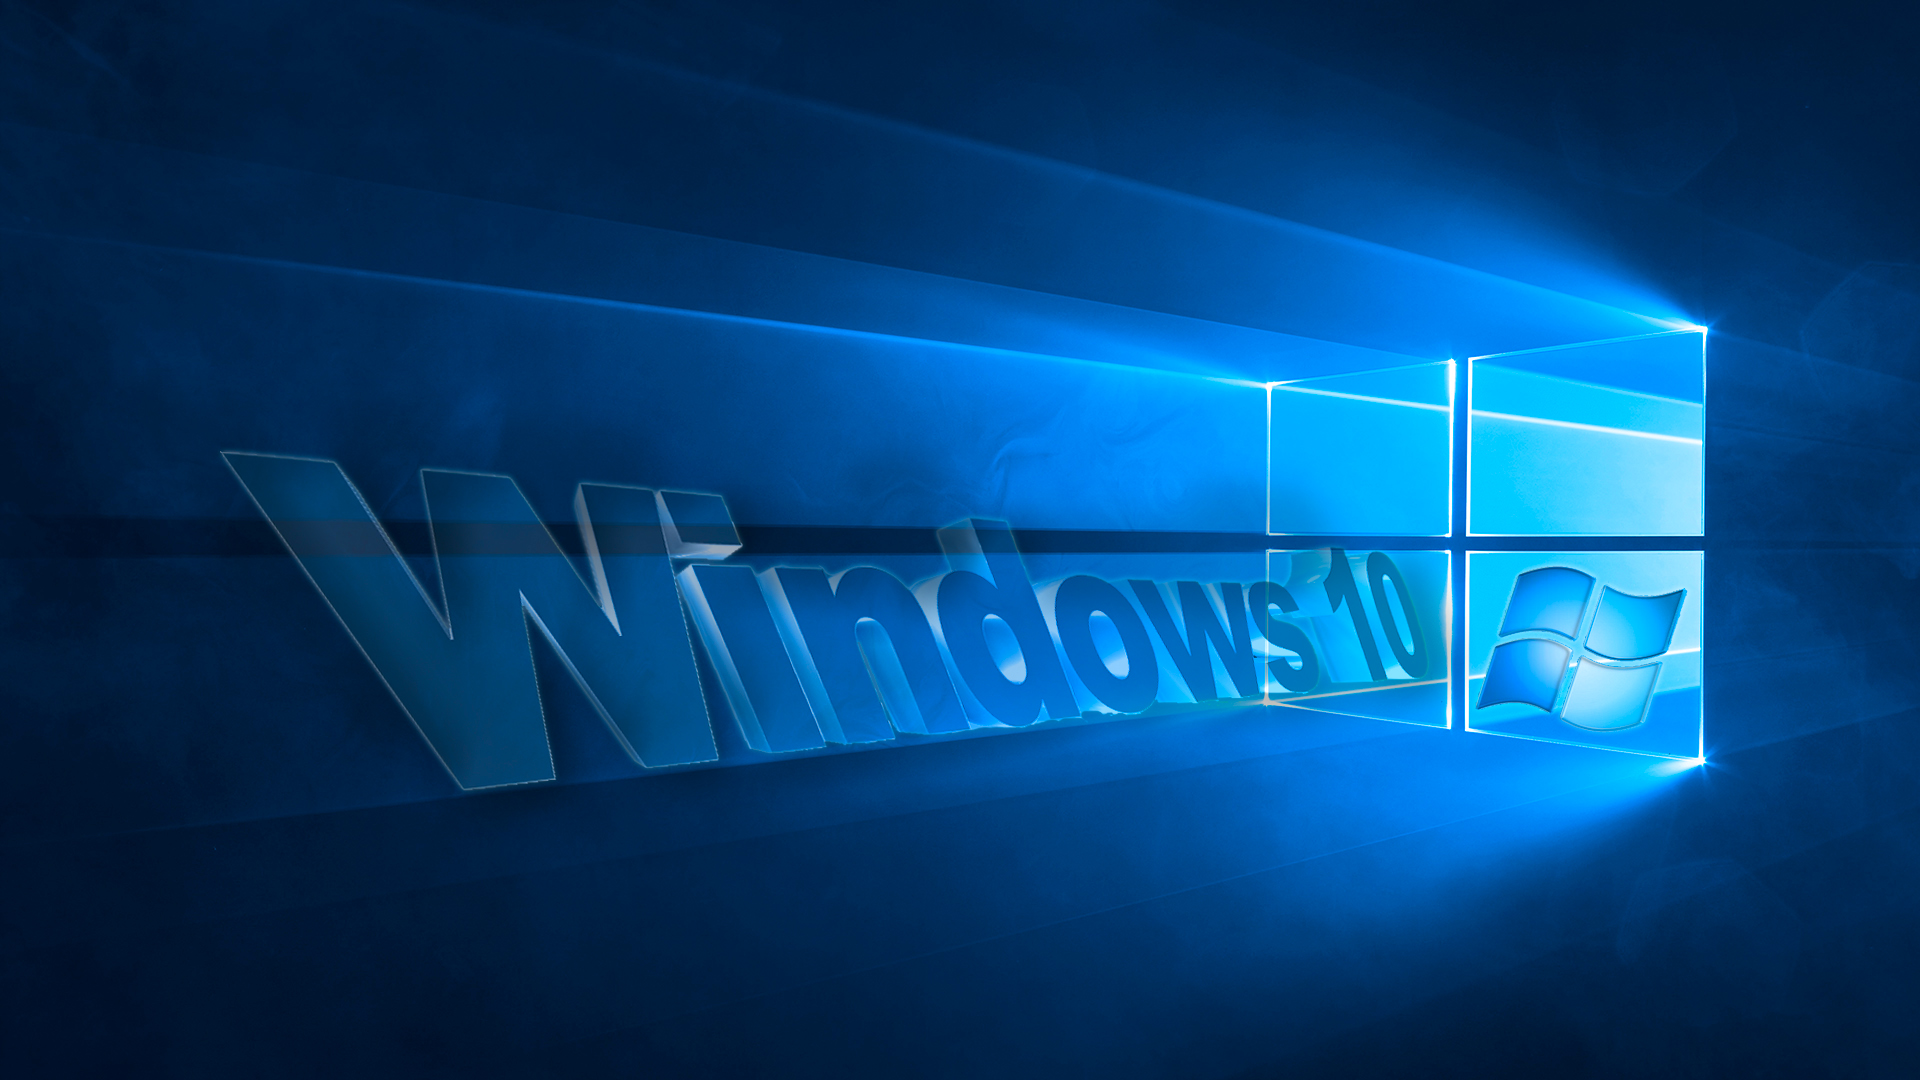 Windows 10 Backgrounds, Pictures, Images